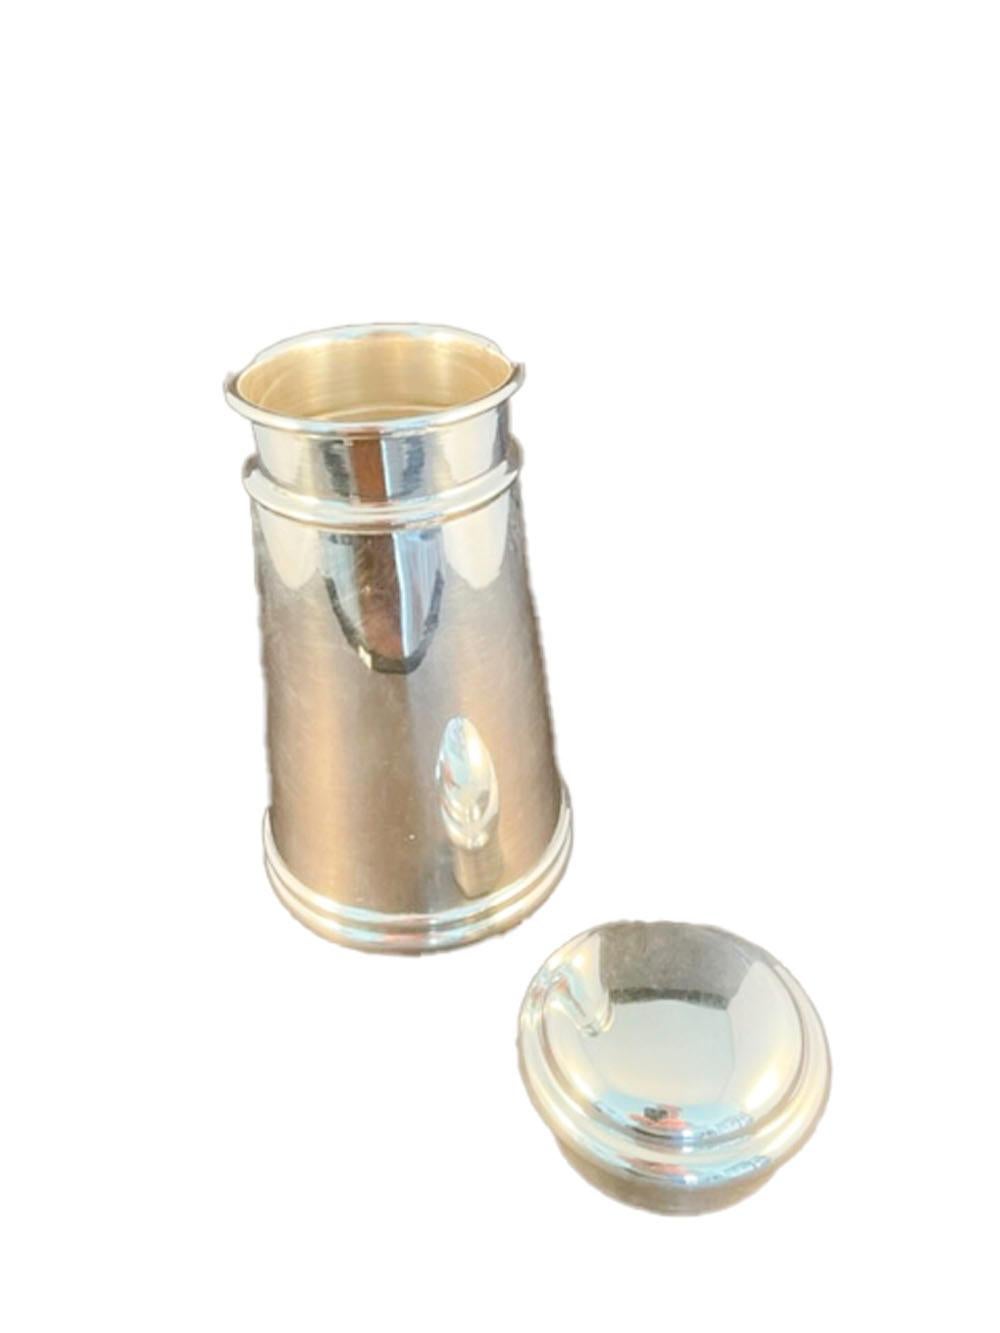 English Art Deco Silver Plate Cocktail Shaker, Charles S. Green & Co. In Good Condition For Sale In Nantucket, MA